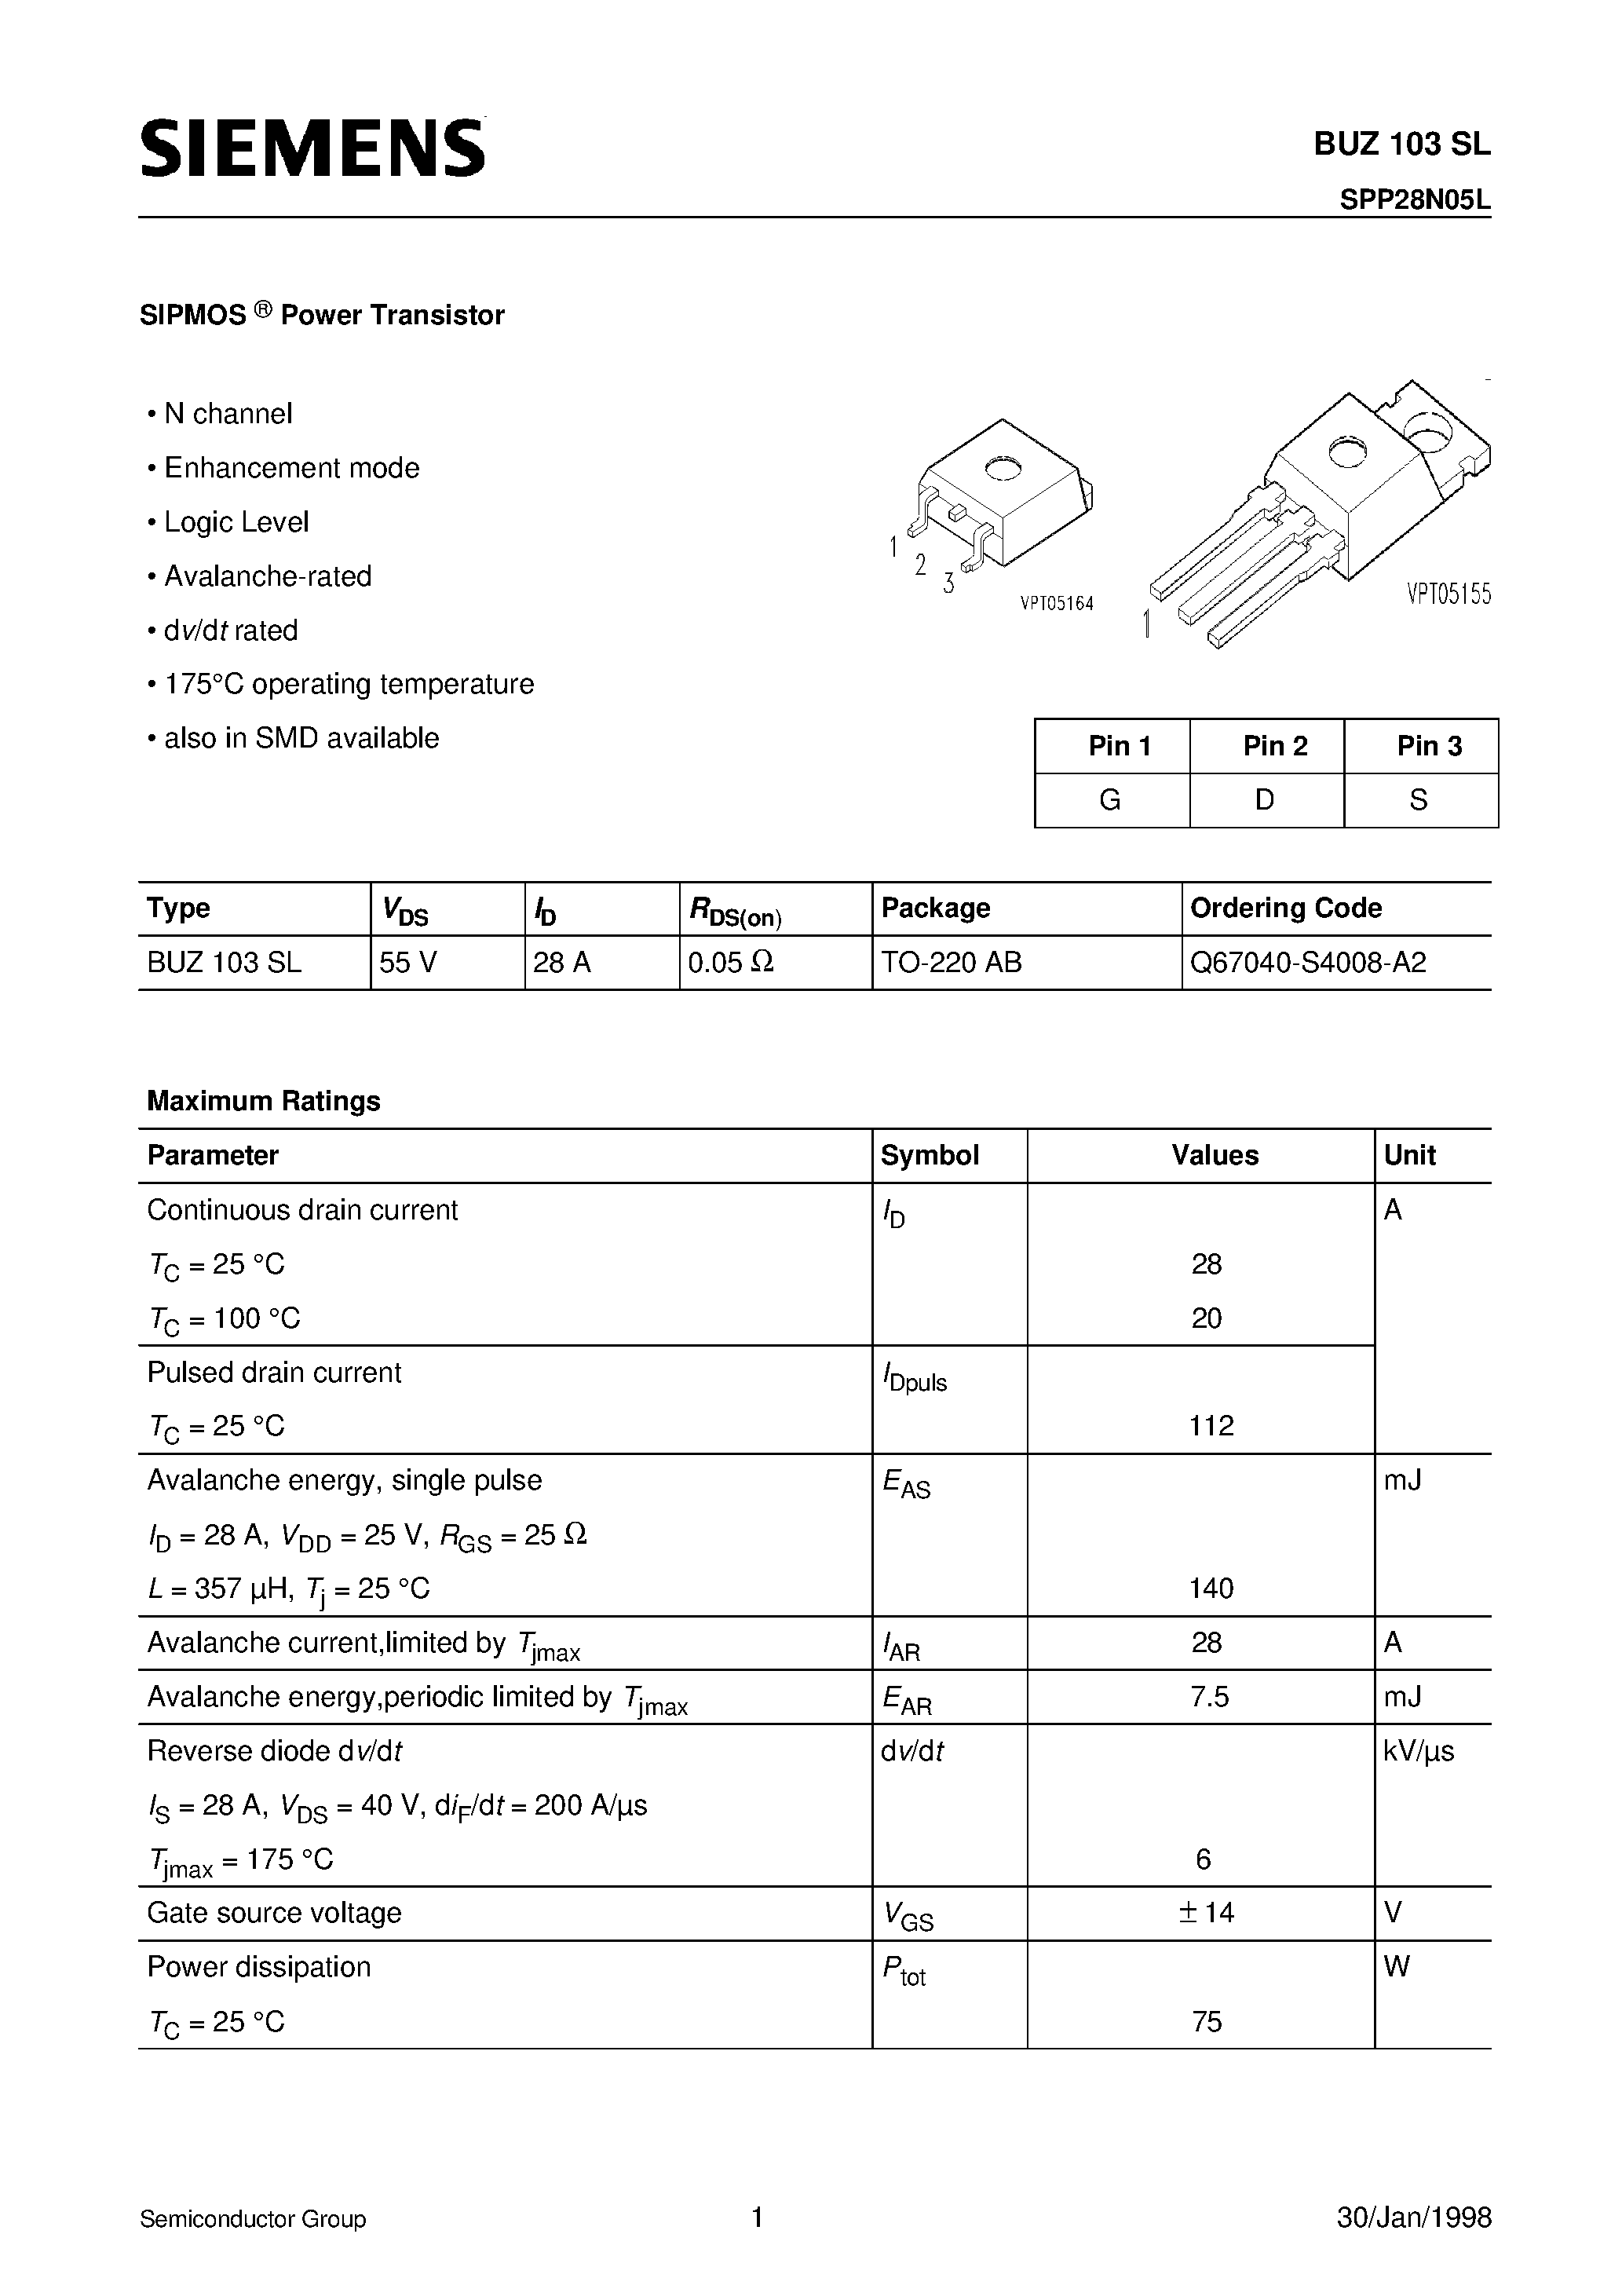 Datasheet BUZ103SL - SIPMOS Power Transistor (N channel Enhancement mode Logic Level Avalanche-rated dv/dt rated) page 1